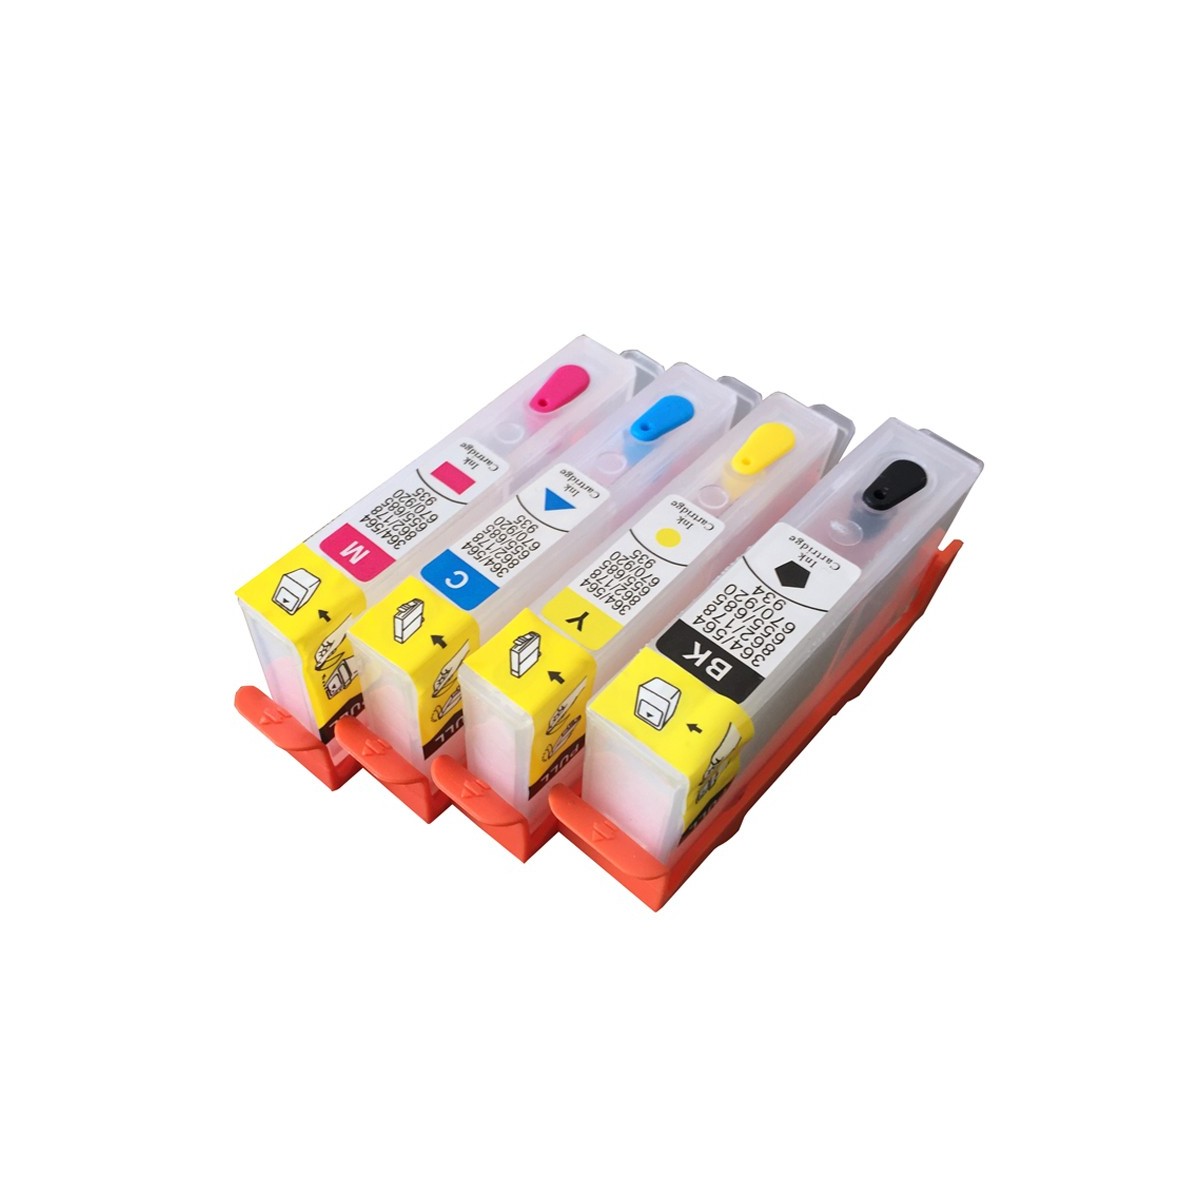 Cartouches rechargeables compatibles HP HP934/935